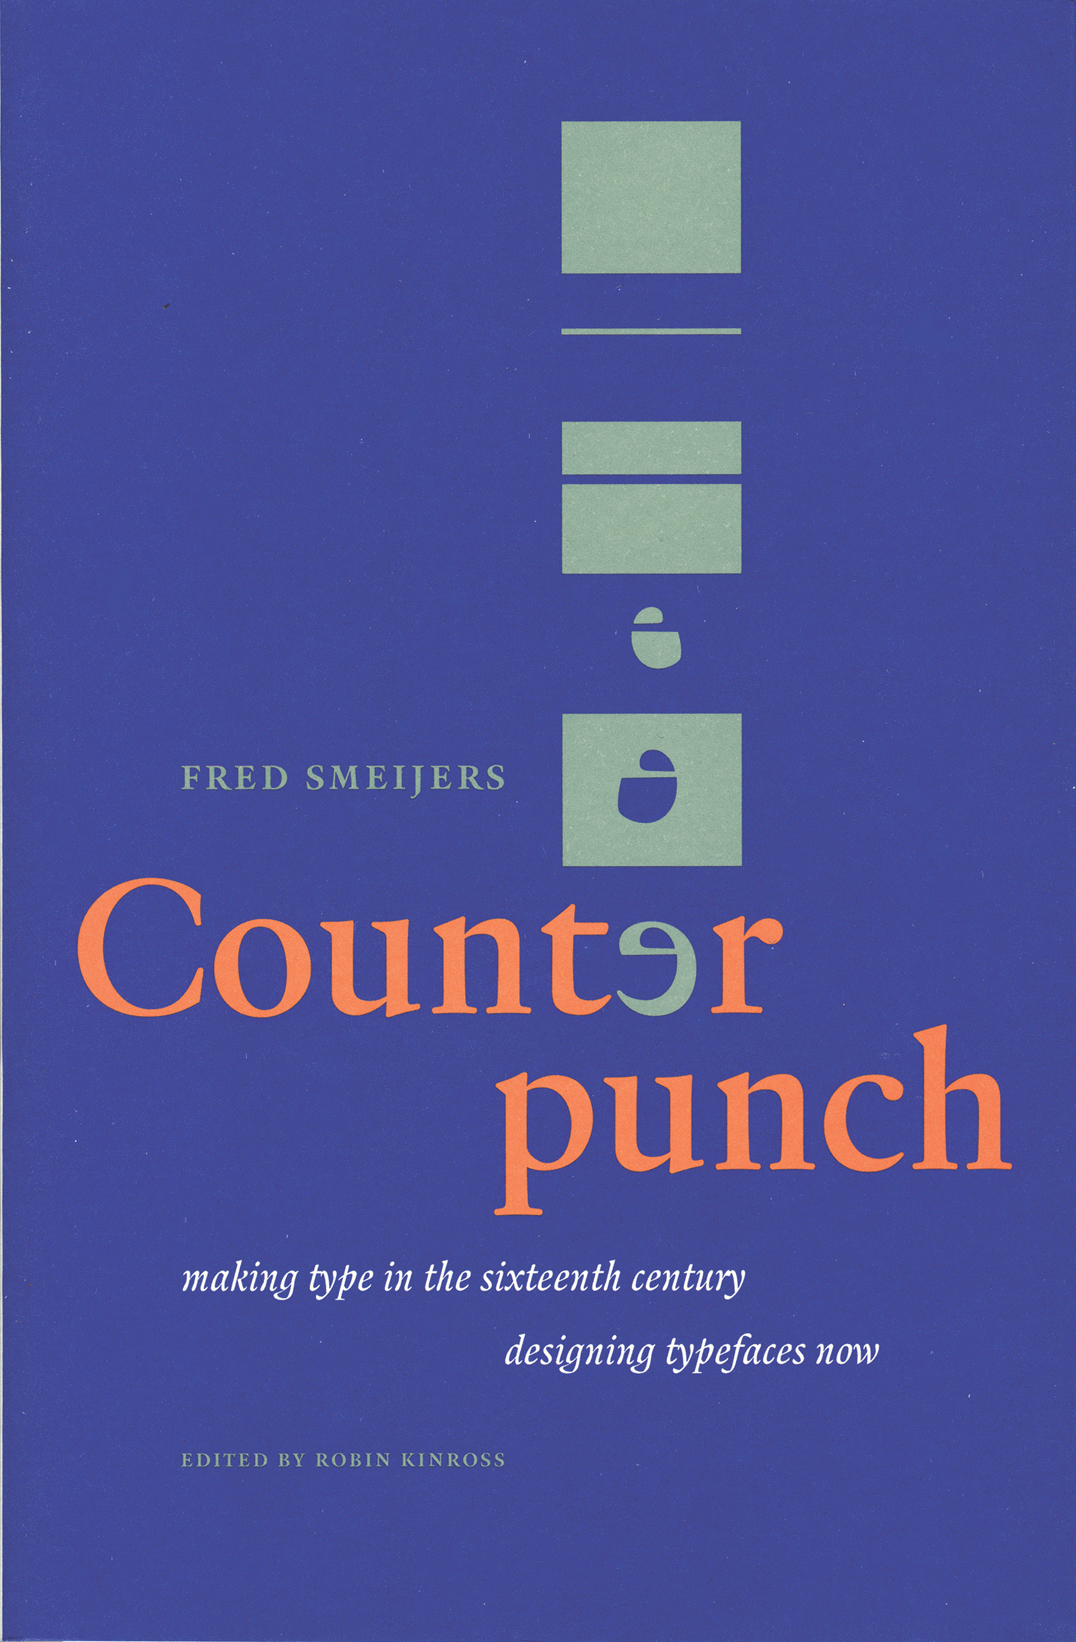 ‘Counterpunch’: how the book was made